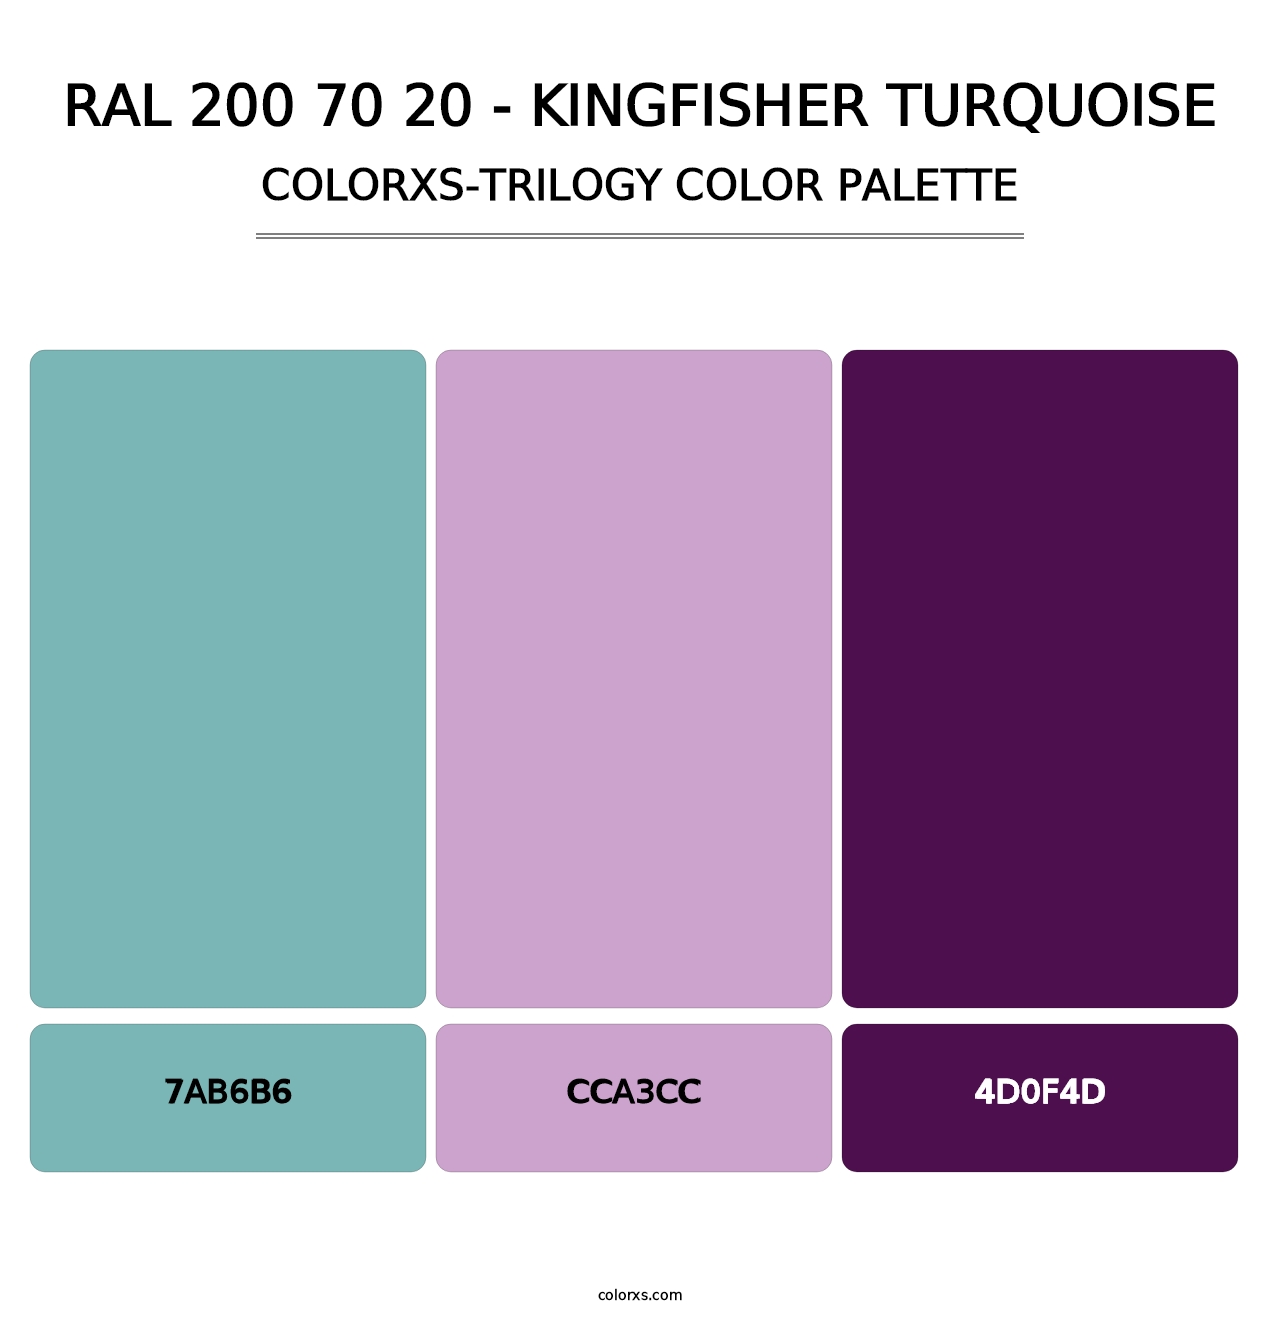 RAL 200 70 20 - Kingfisher Turquoise - Colorxs Trilogy Palette